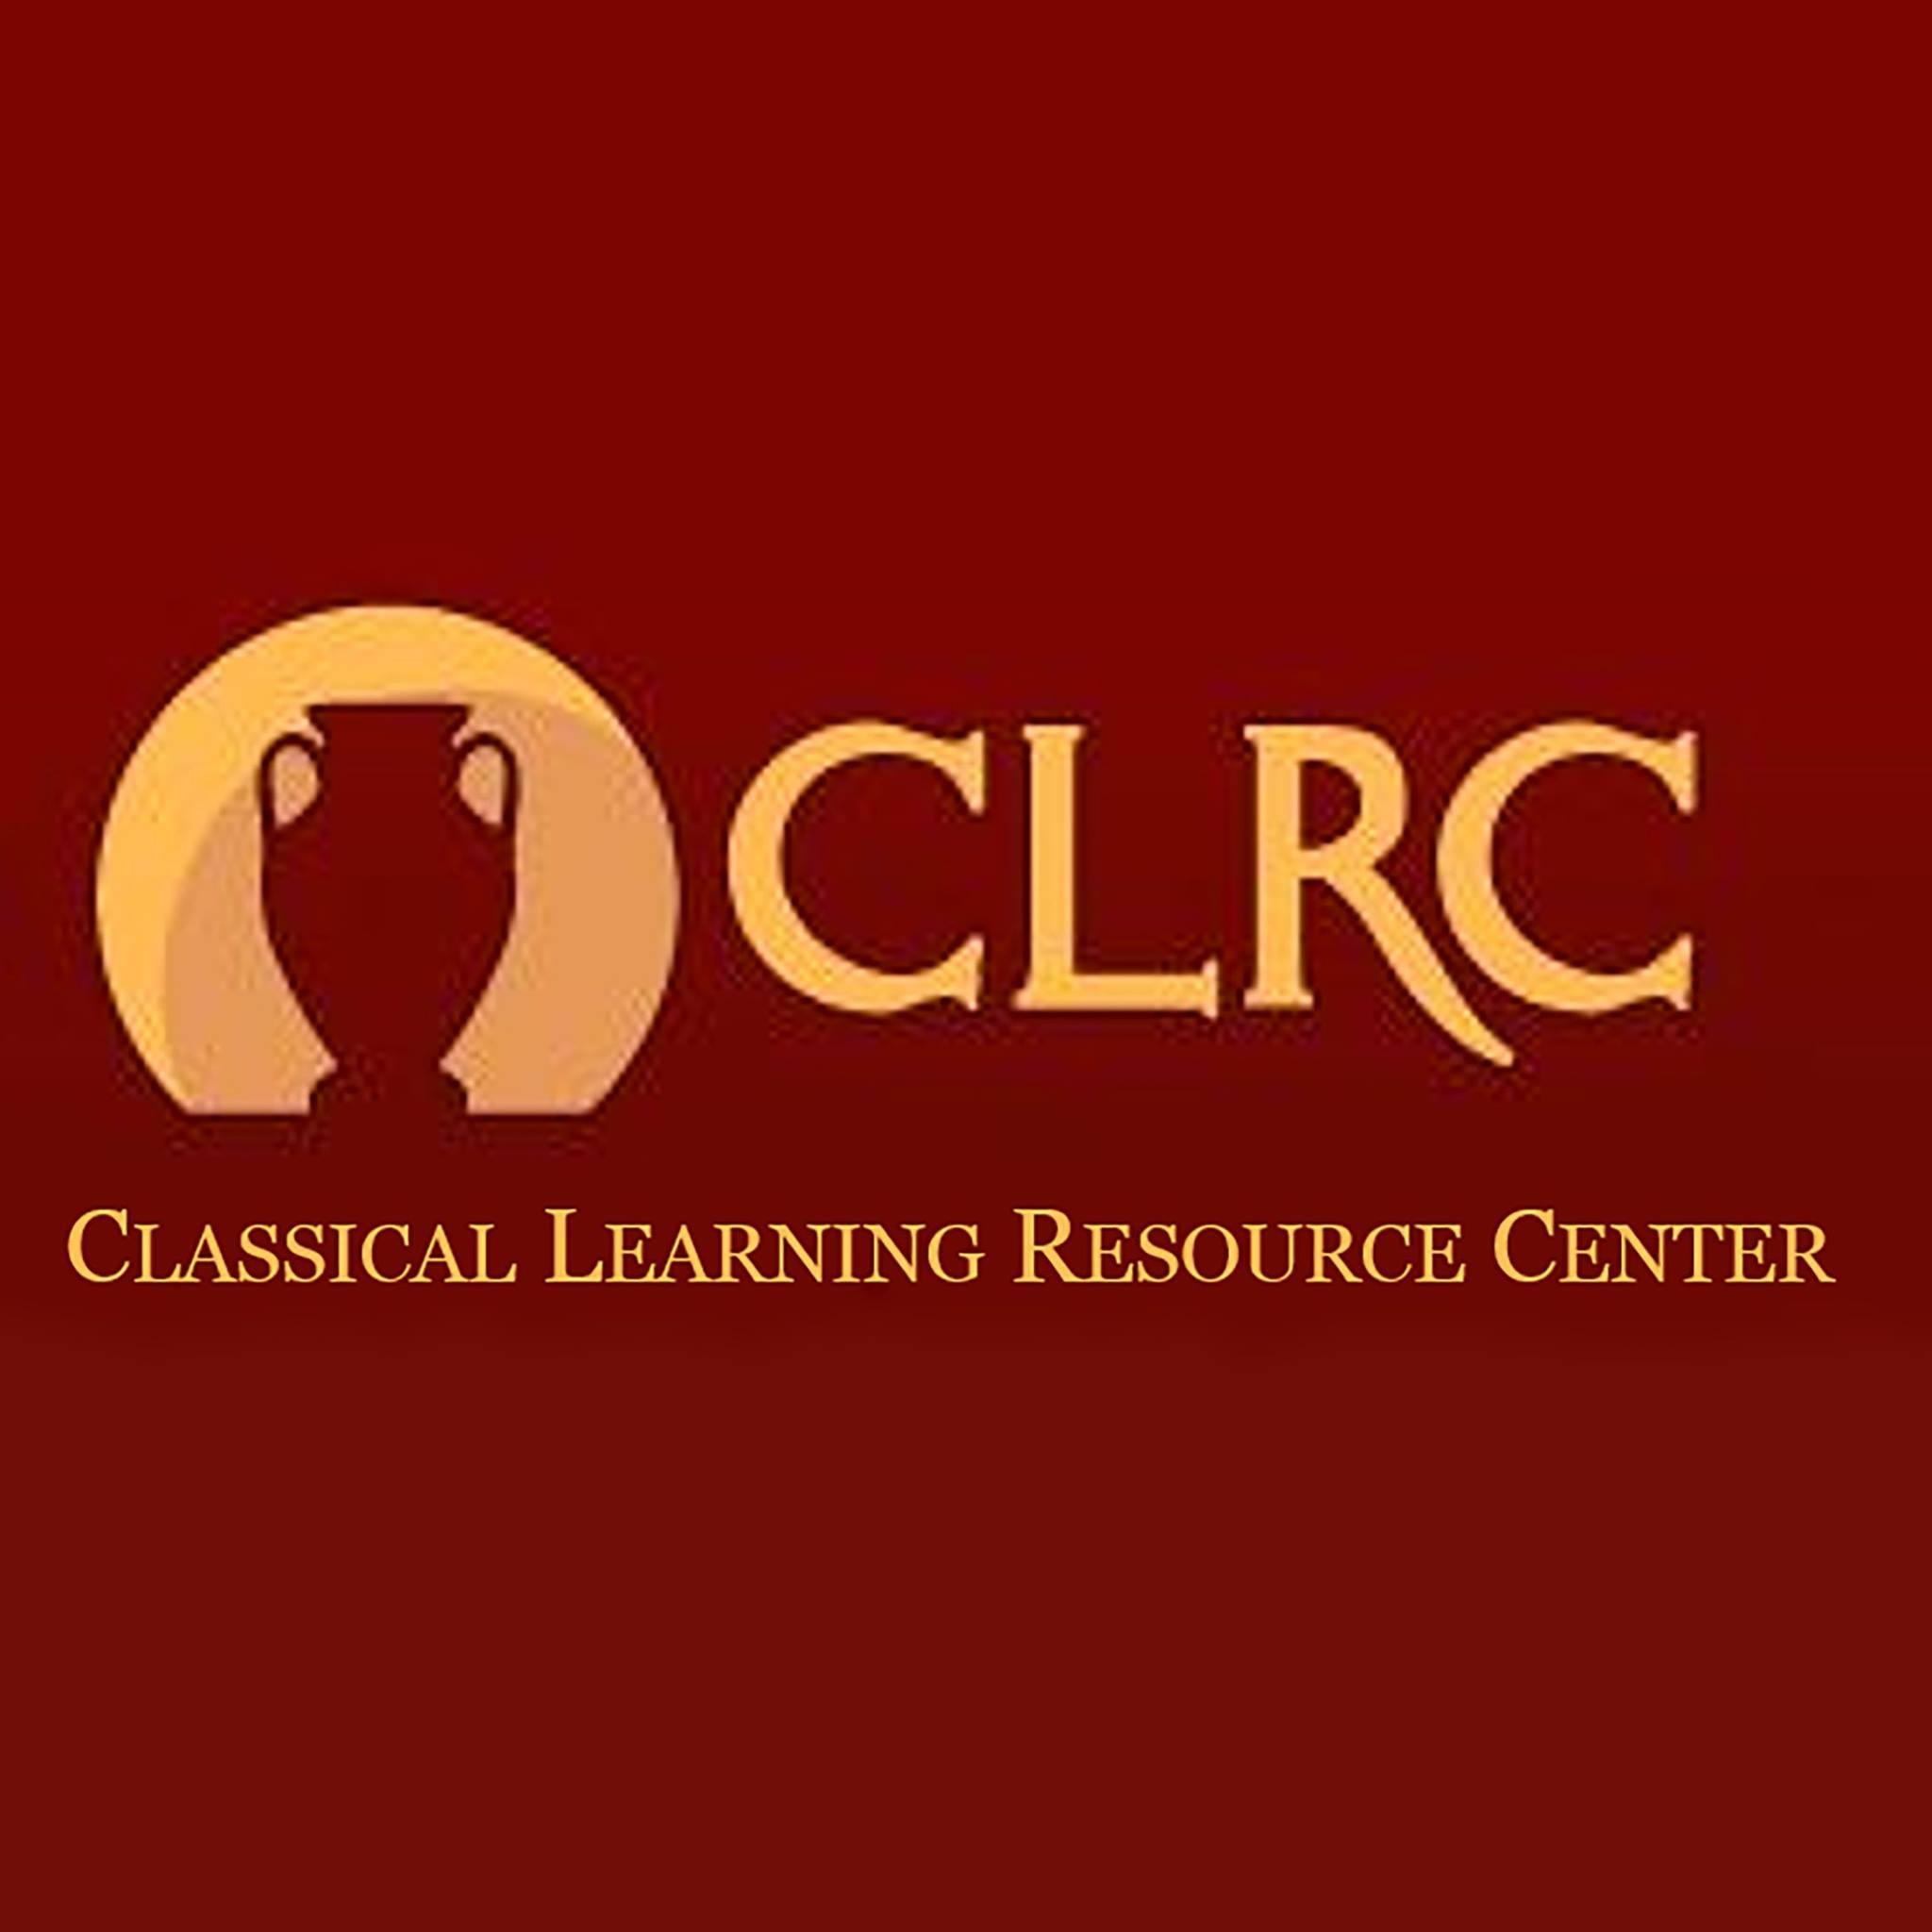 Classical Learning Resource Center logo